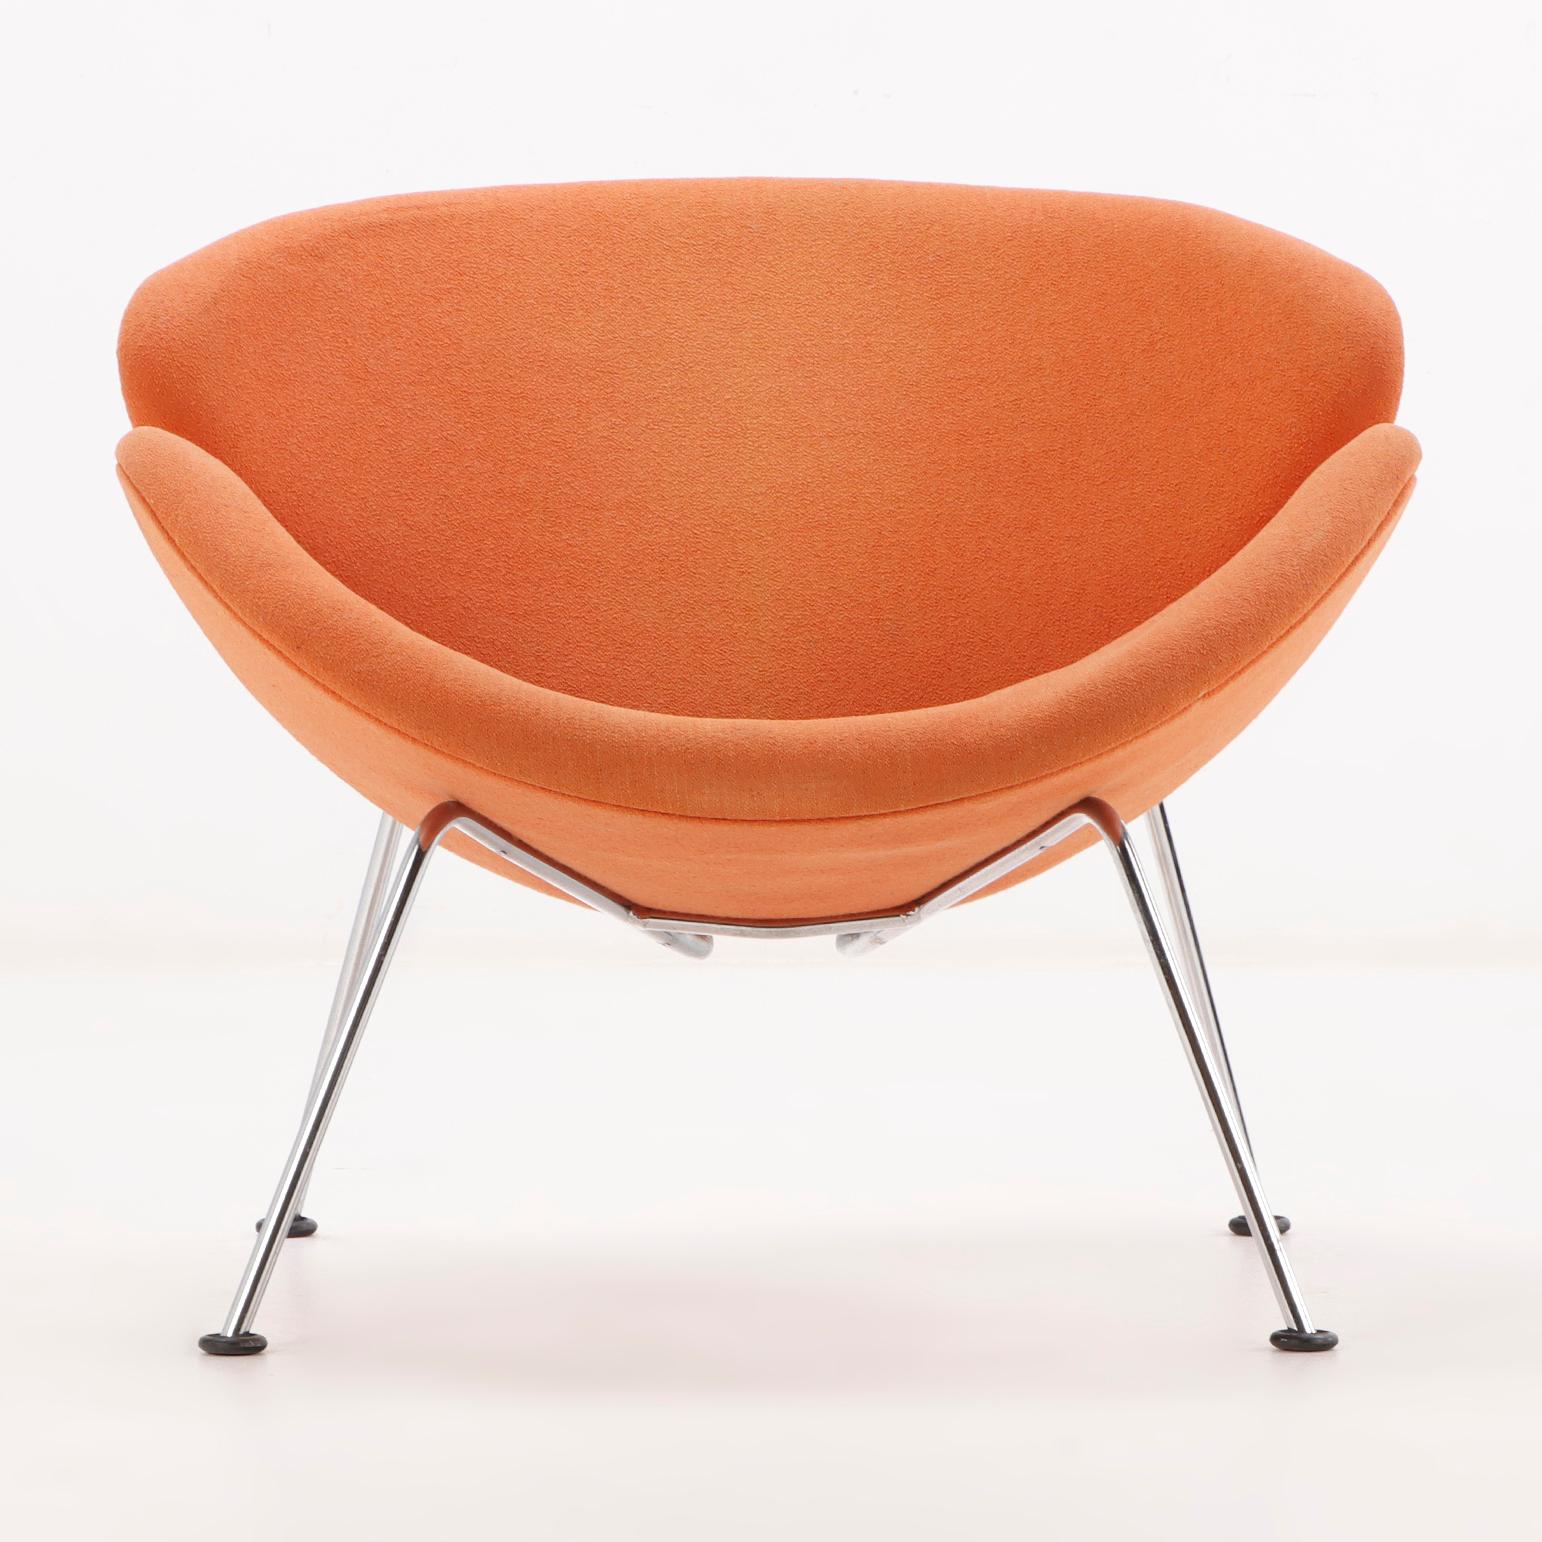 A pair of upholstered Pierre Paulin style upholstered chrome orange slice chairs.  